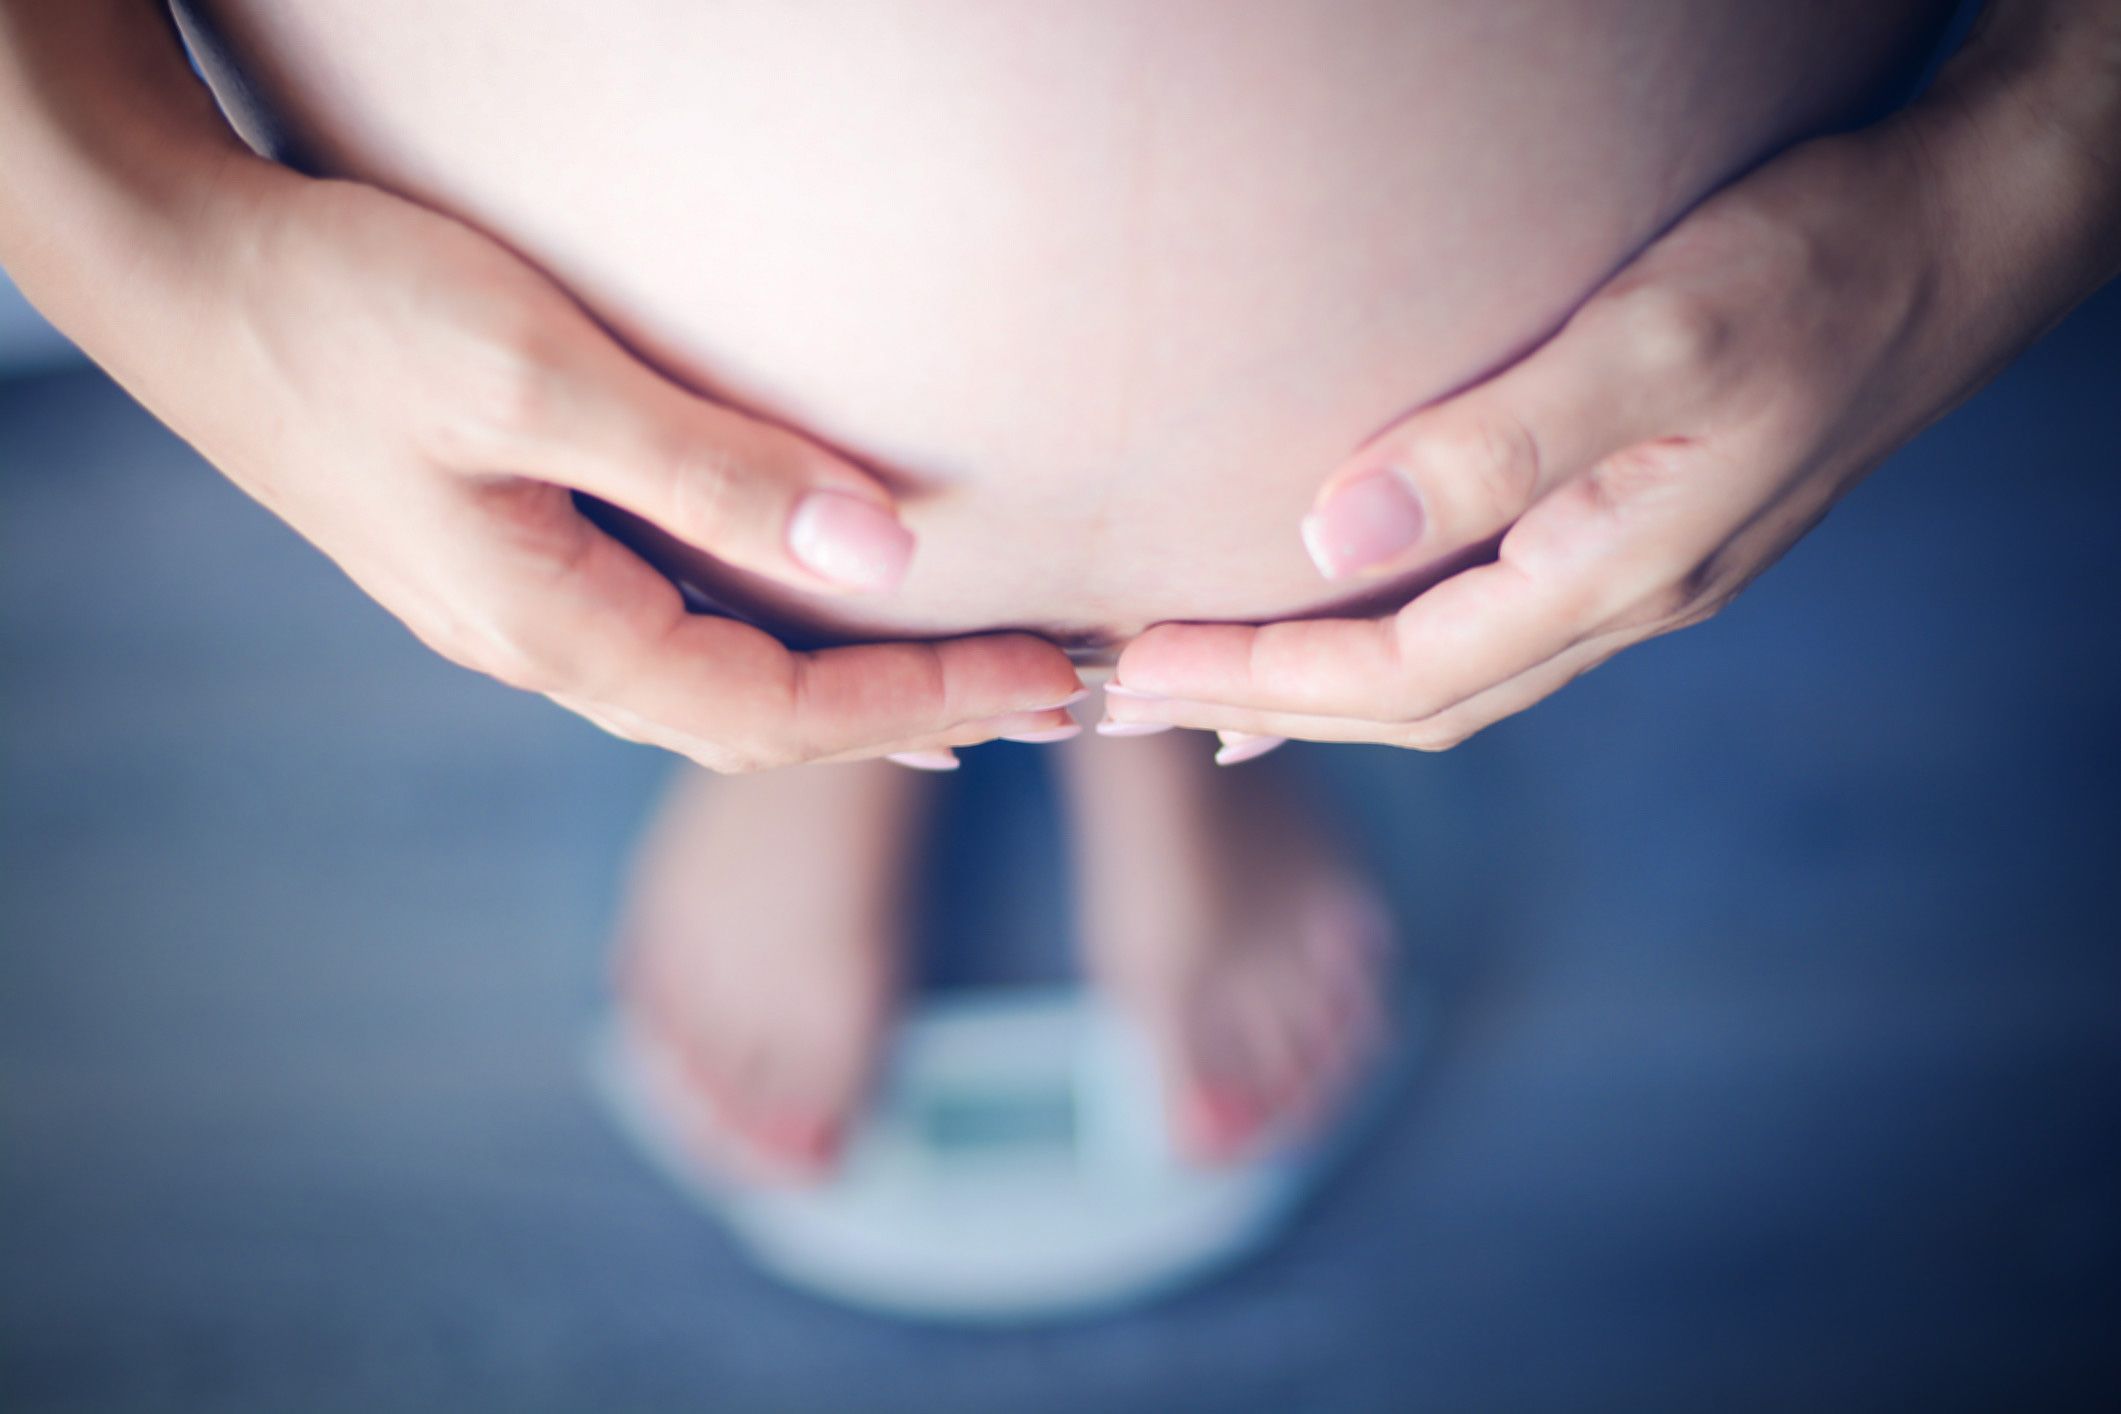 Your weight gain in pregnancy impacts baby’s risk of obesity later in life